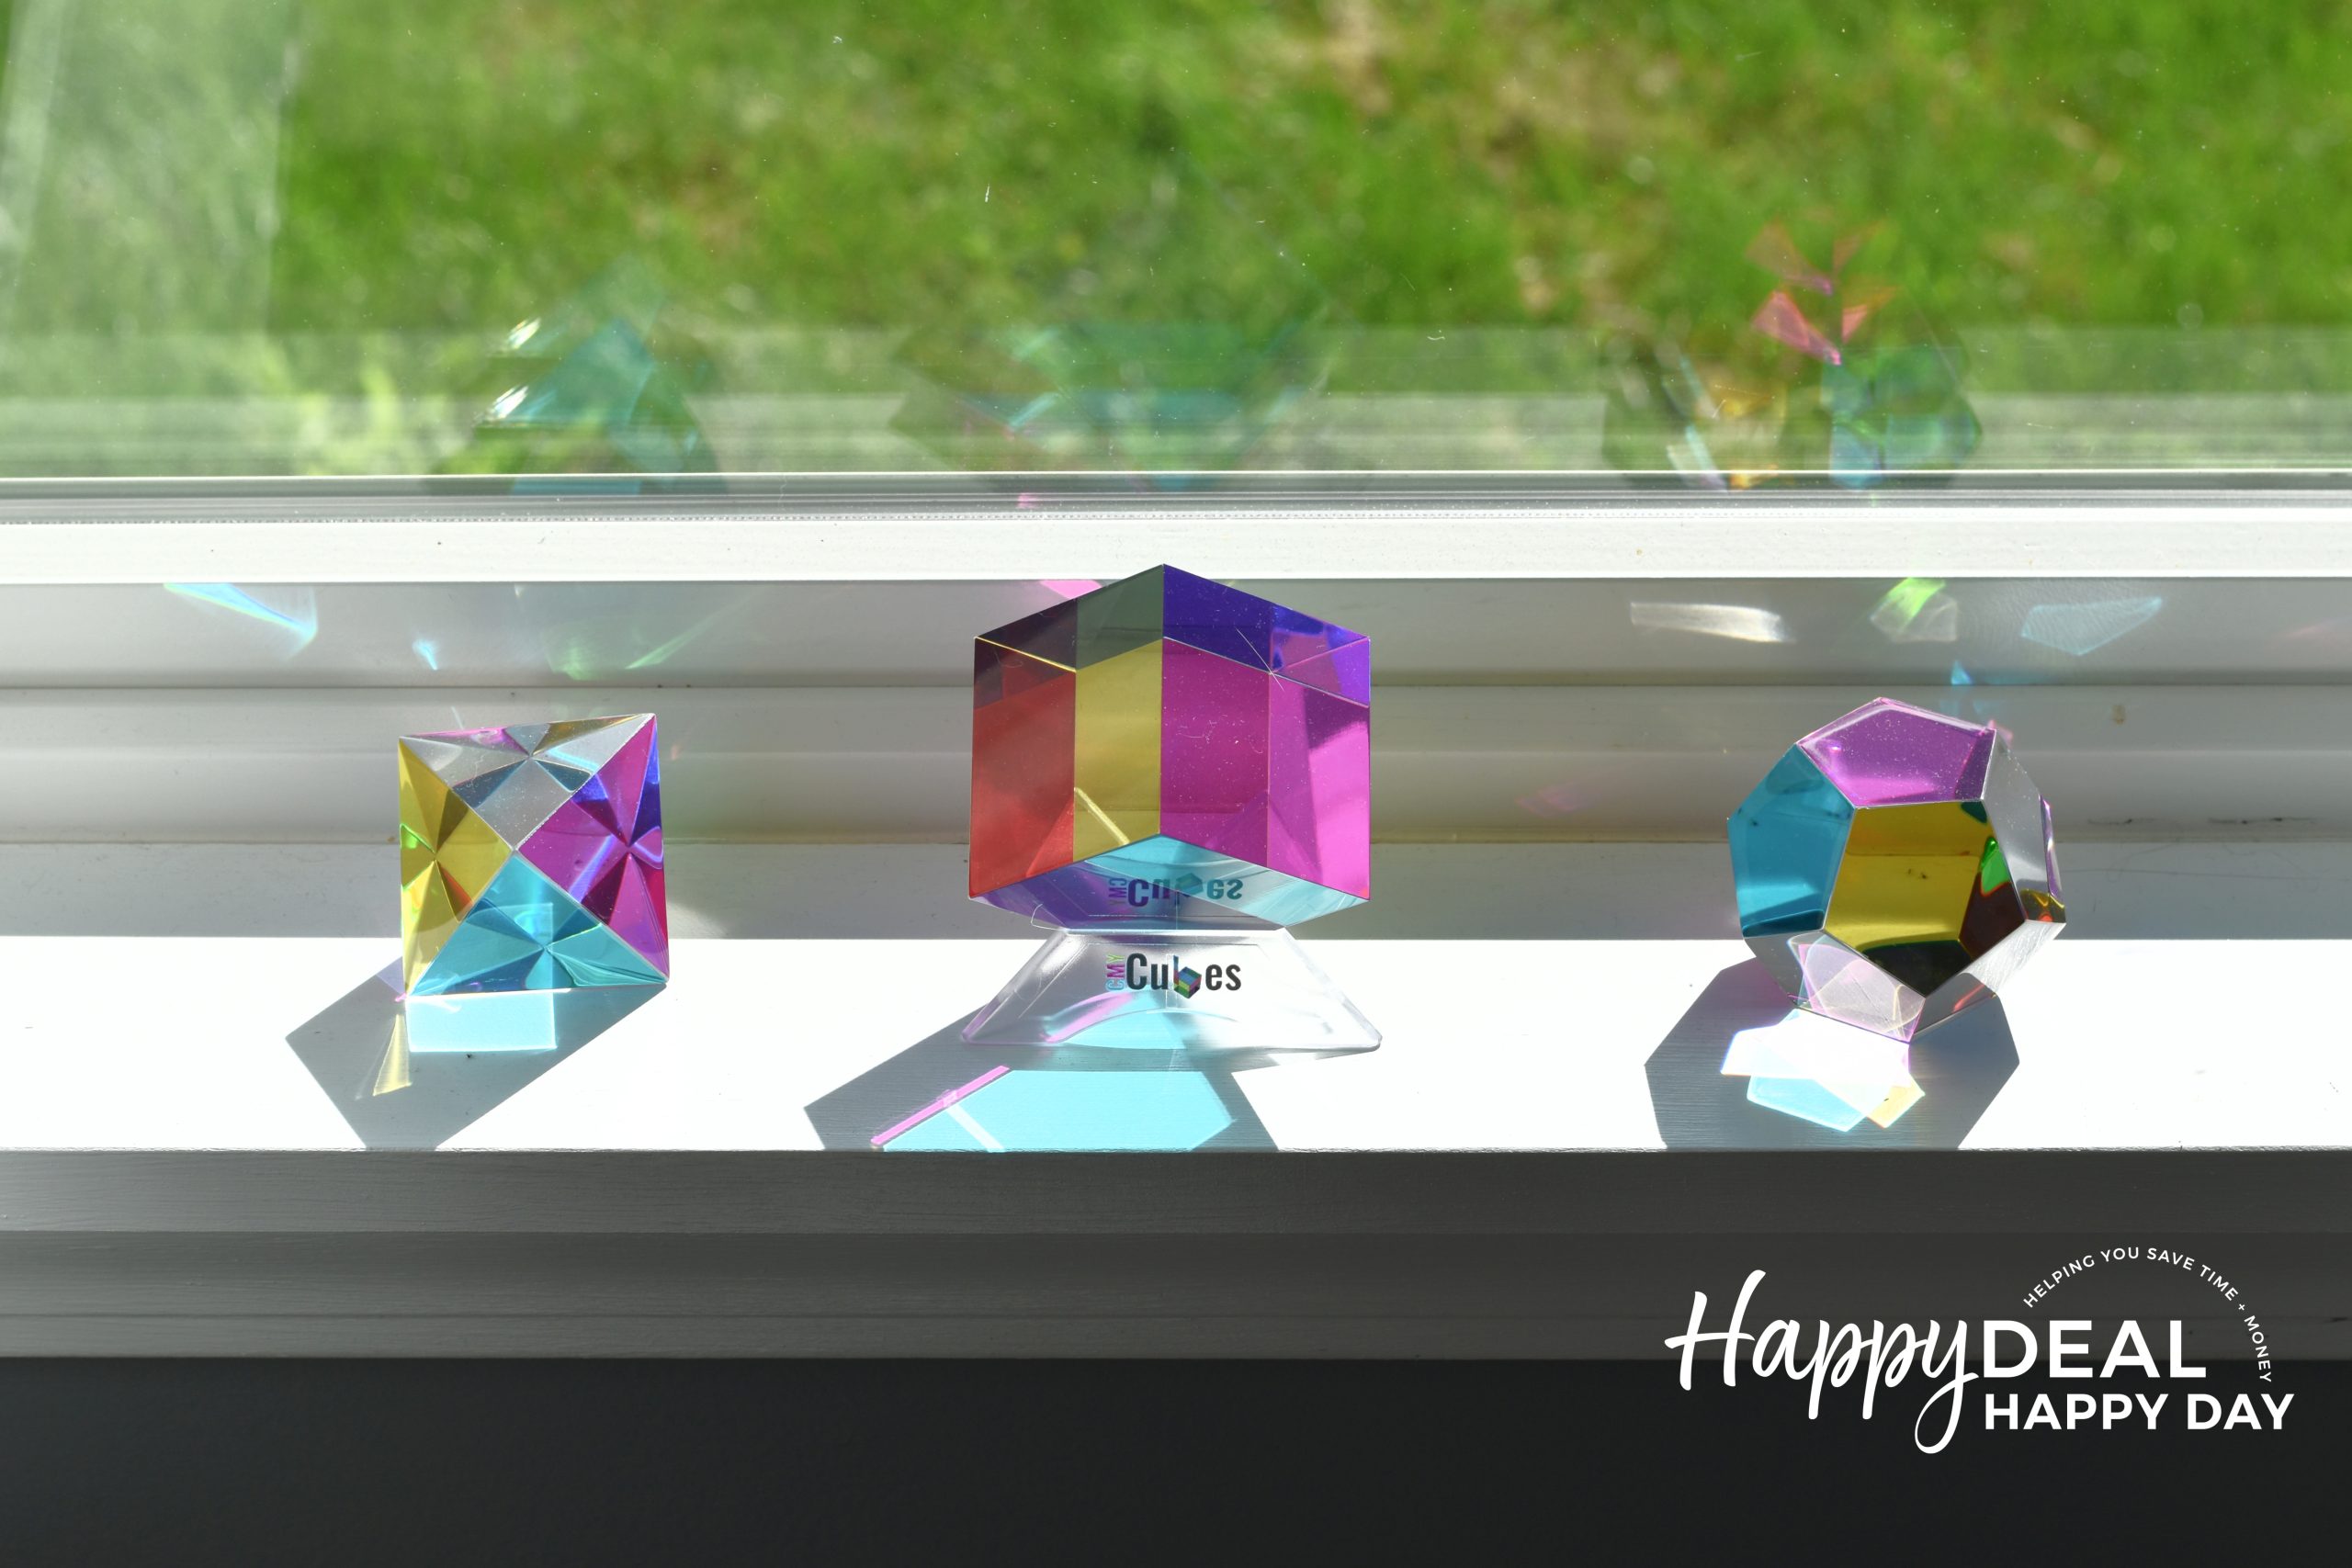 Cubes X 3 In Window Sill 1 Scaled